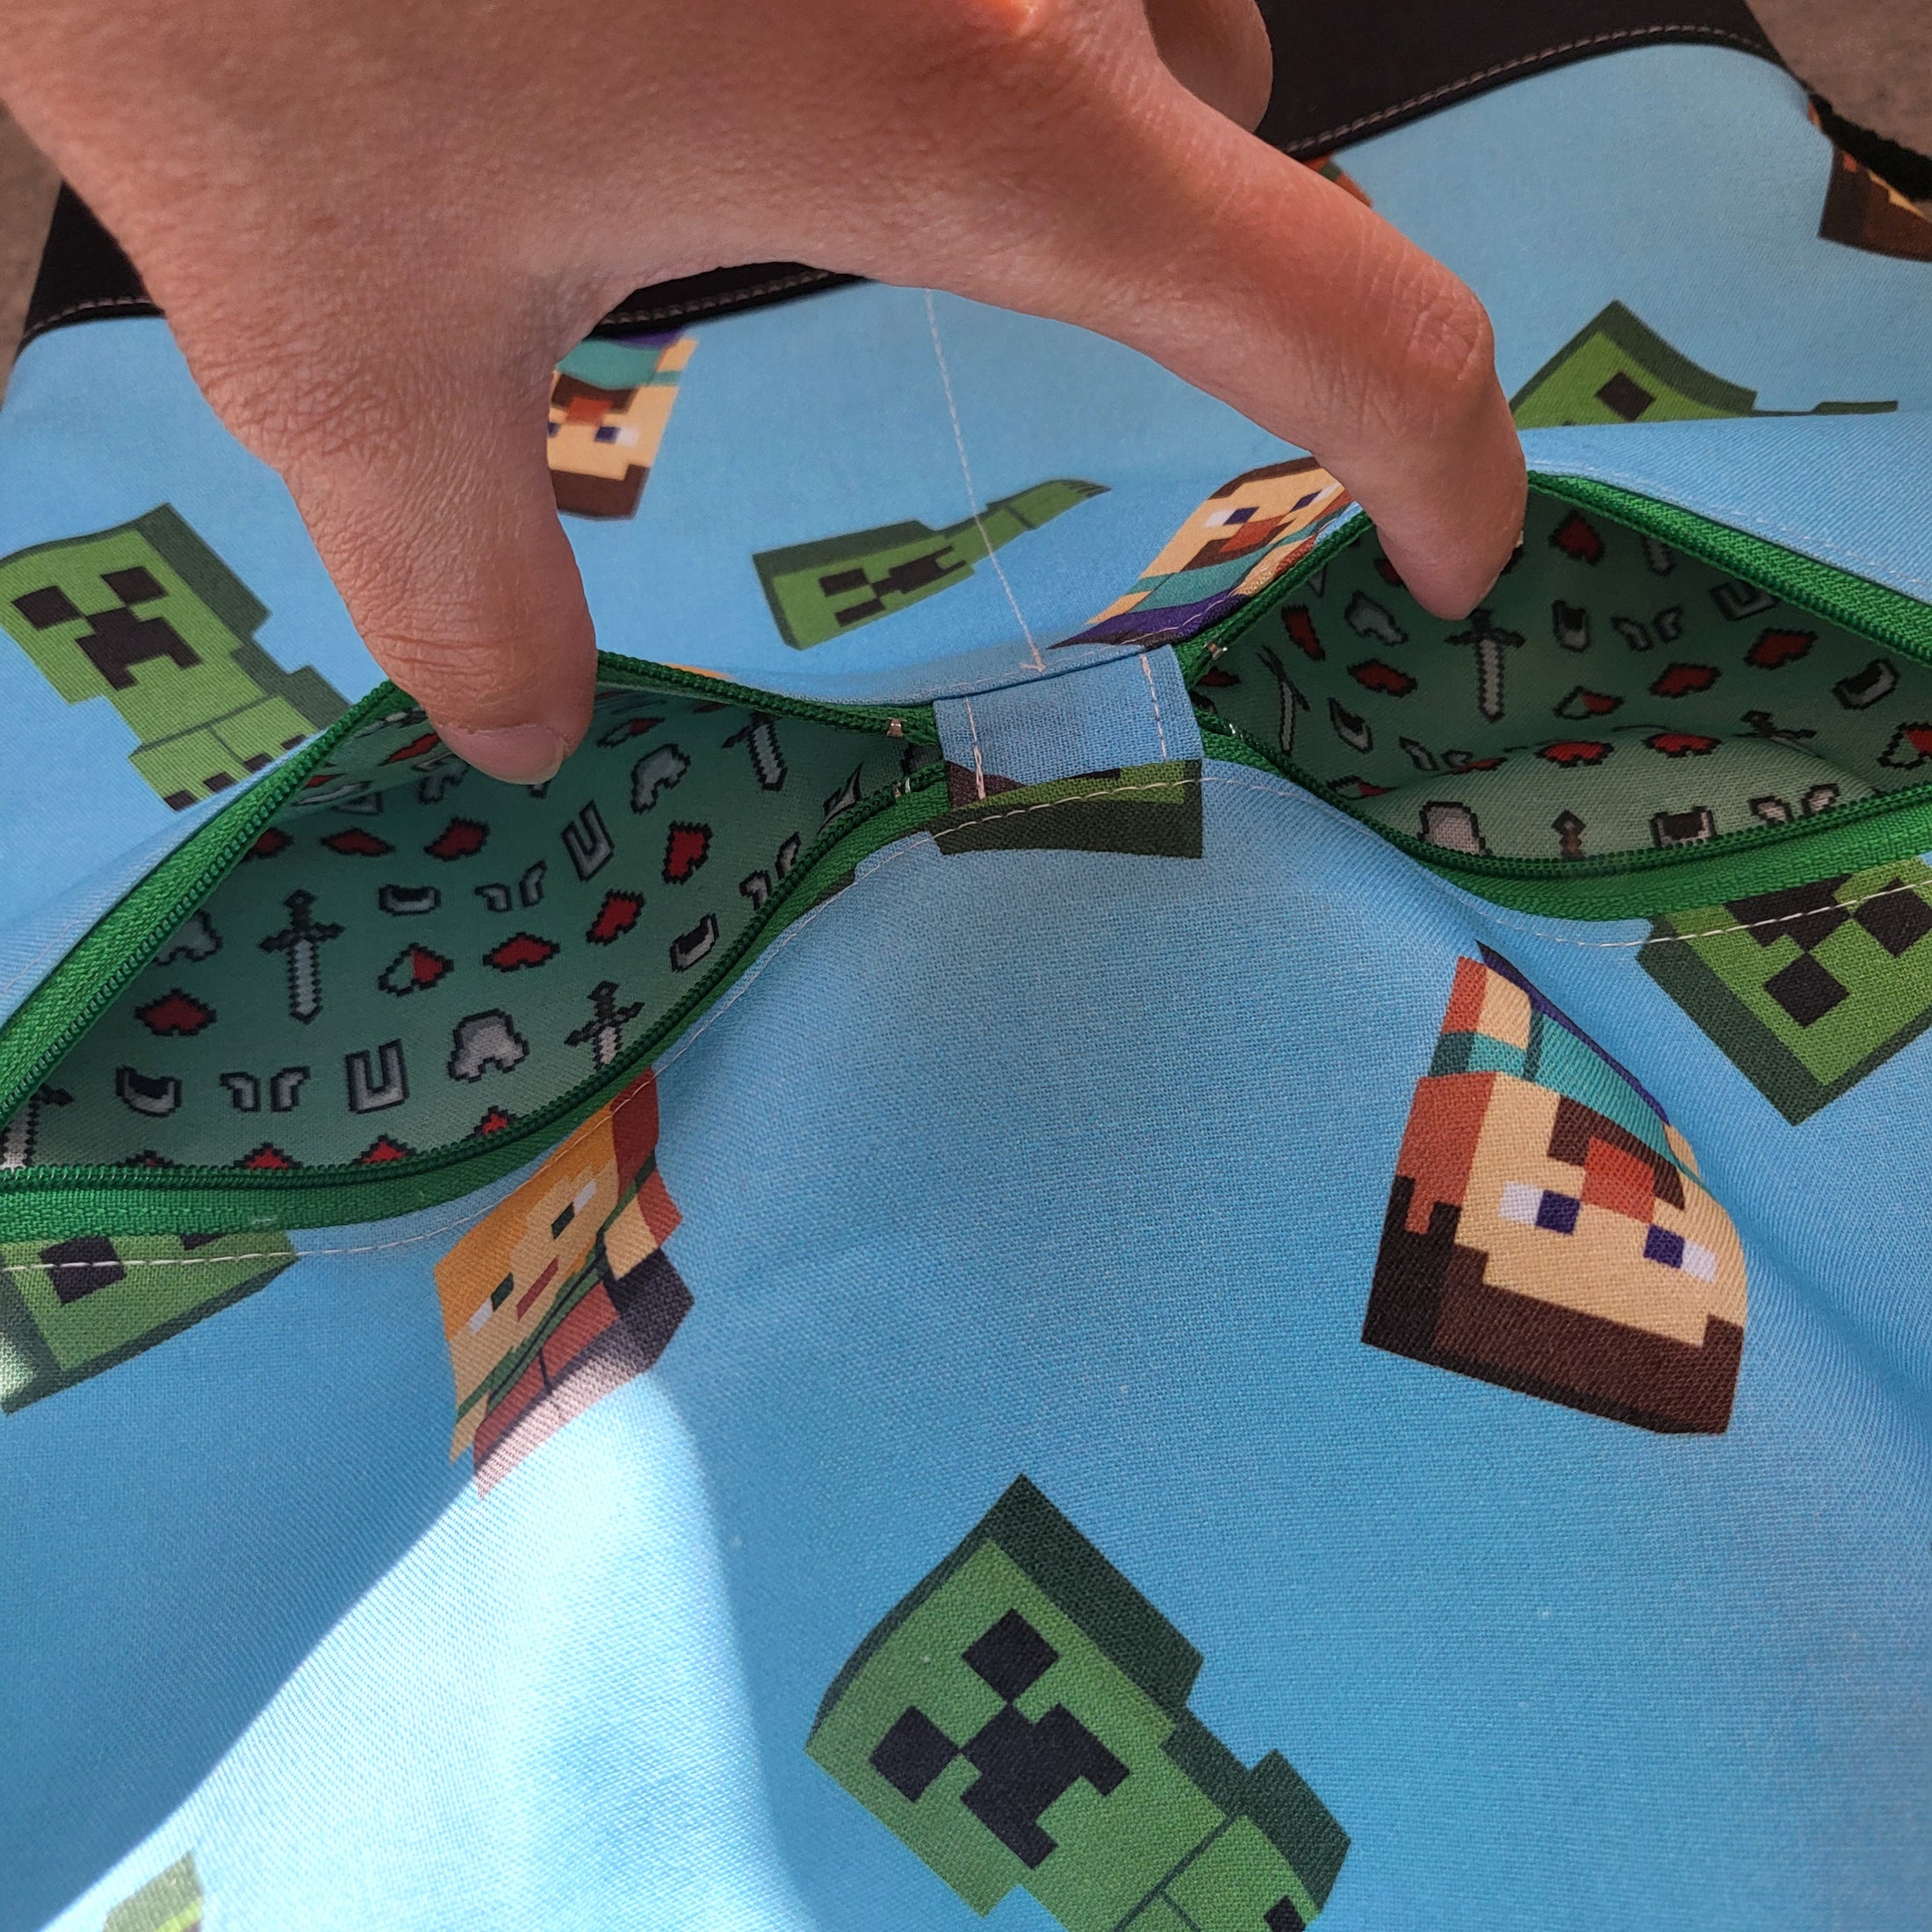 Inside of the Minecraft exterior pockets showing Zelda inspired fabric with hearts and swords. 